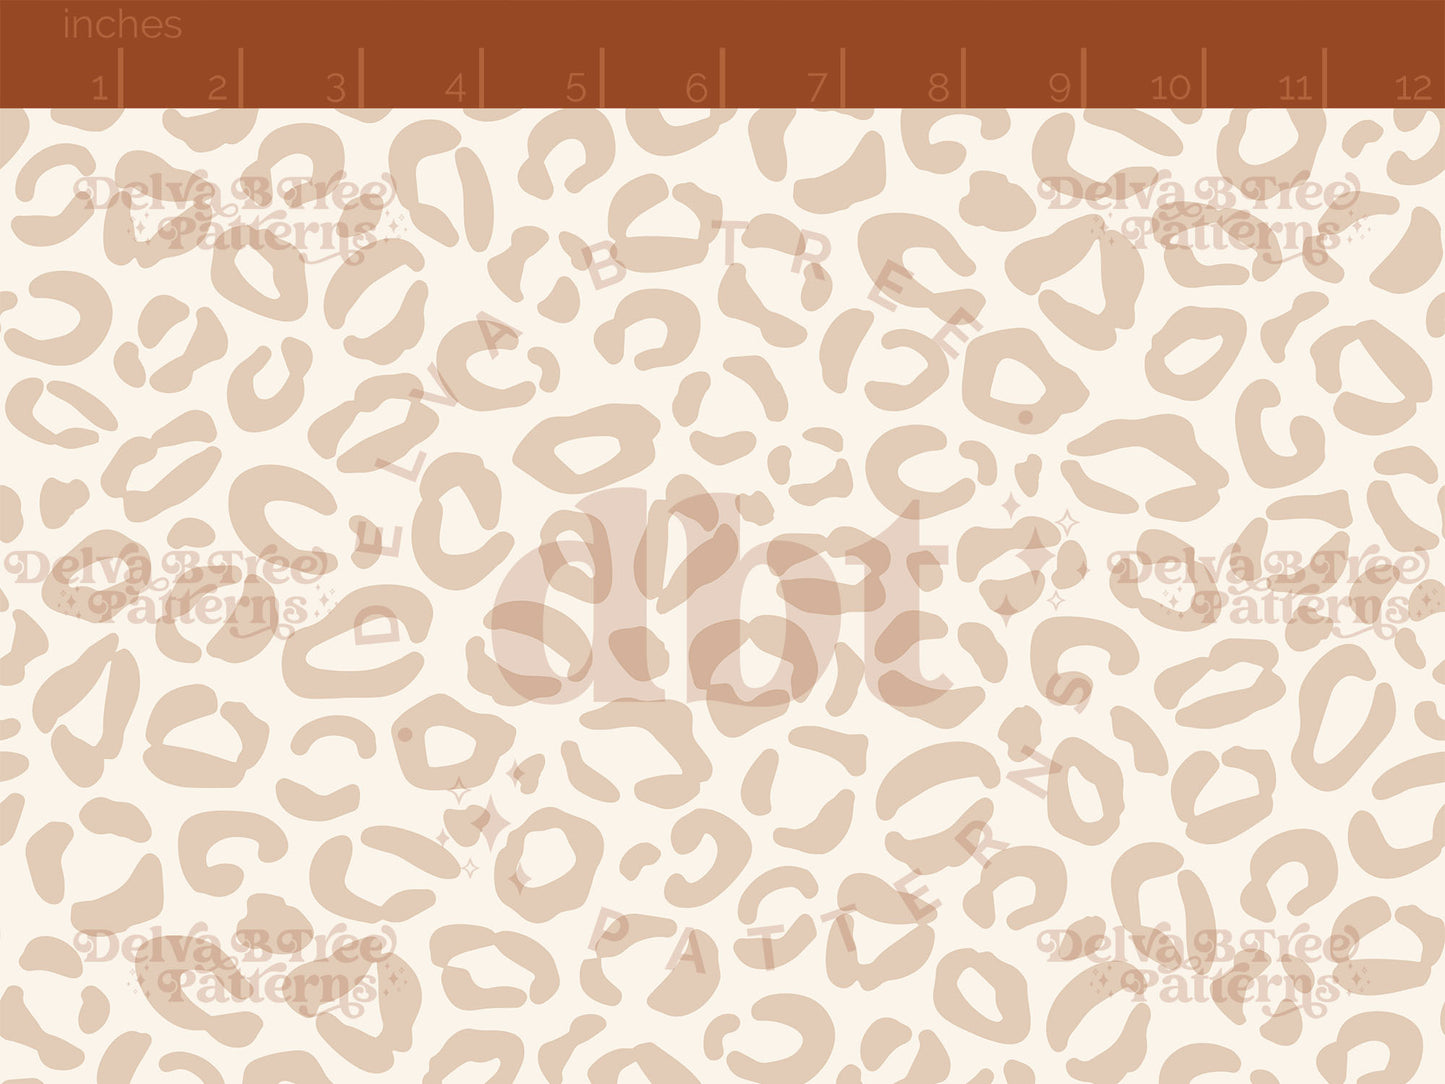 Tan and cream leopard print seamless pattern scale digital file for small shops that make handmade products in small batches.